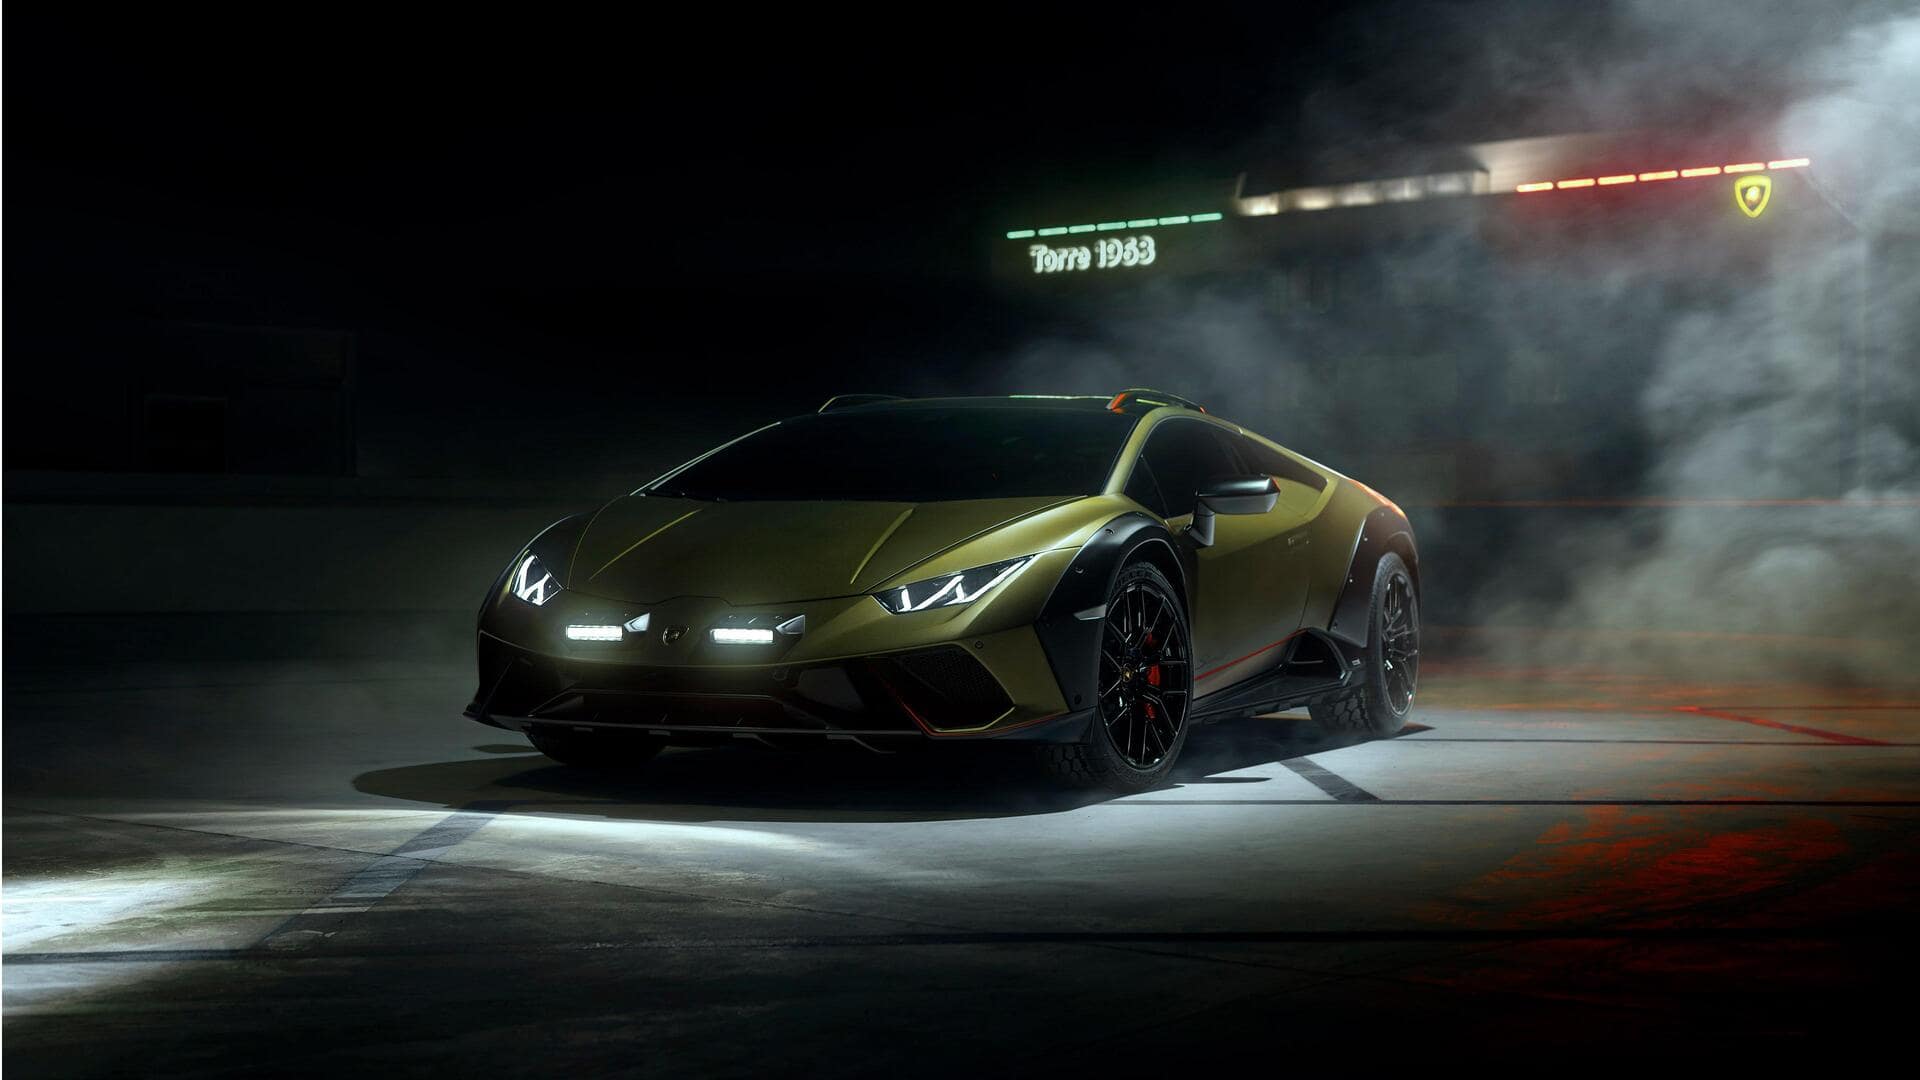 Limited-run Lamborghini Huracan Sterrato reaches India, deliveries to commence soon